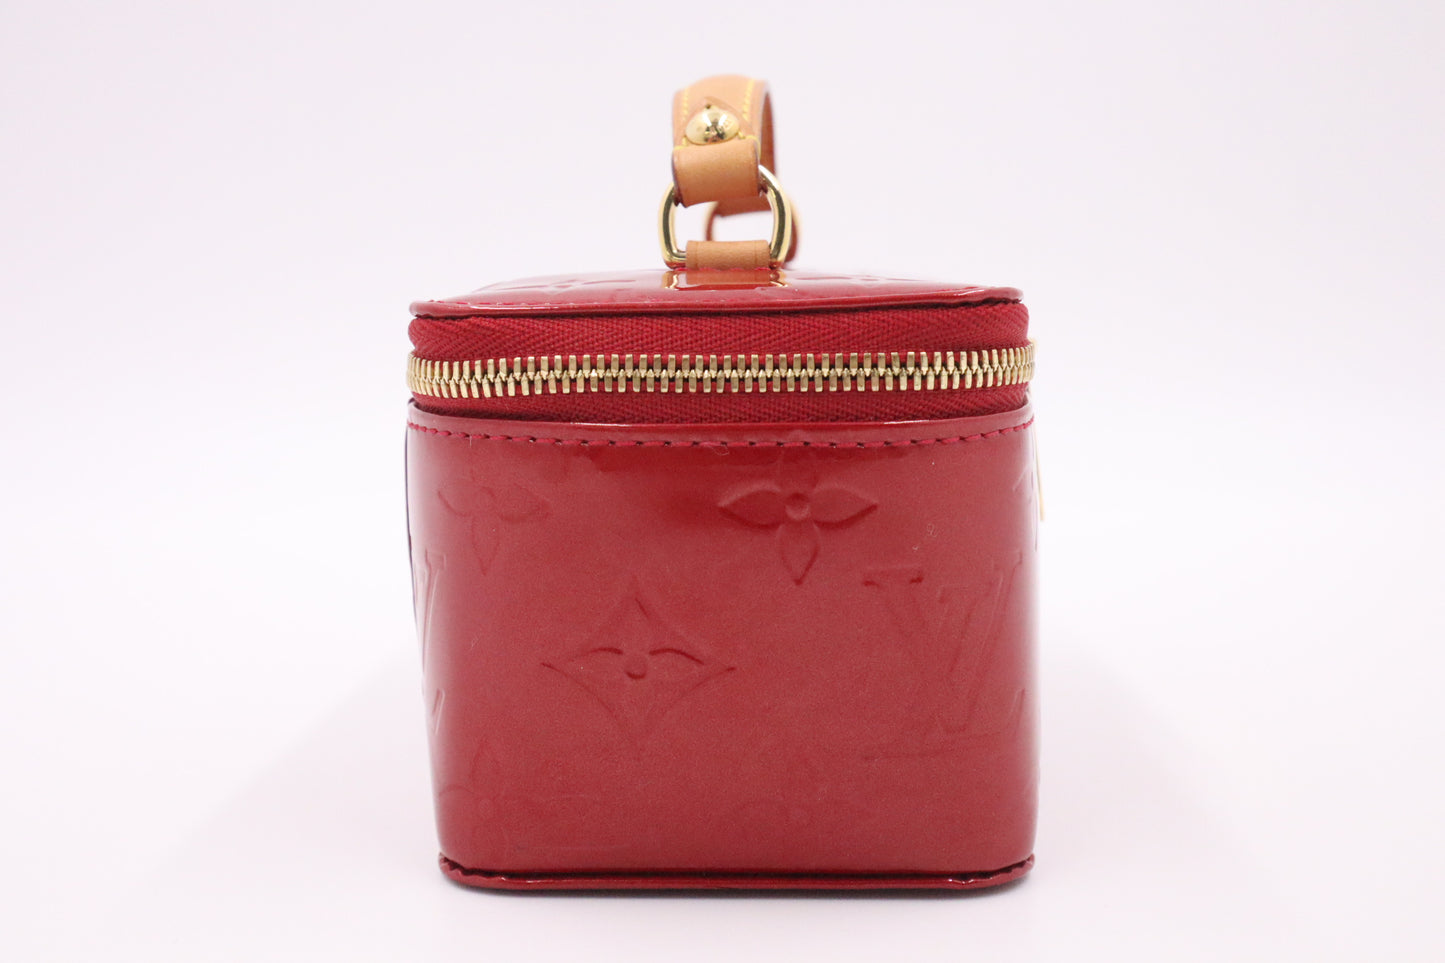 Louis Vuitton Vanity Case in Pomme D'Amour Vernis Leather